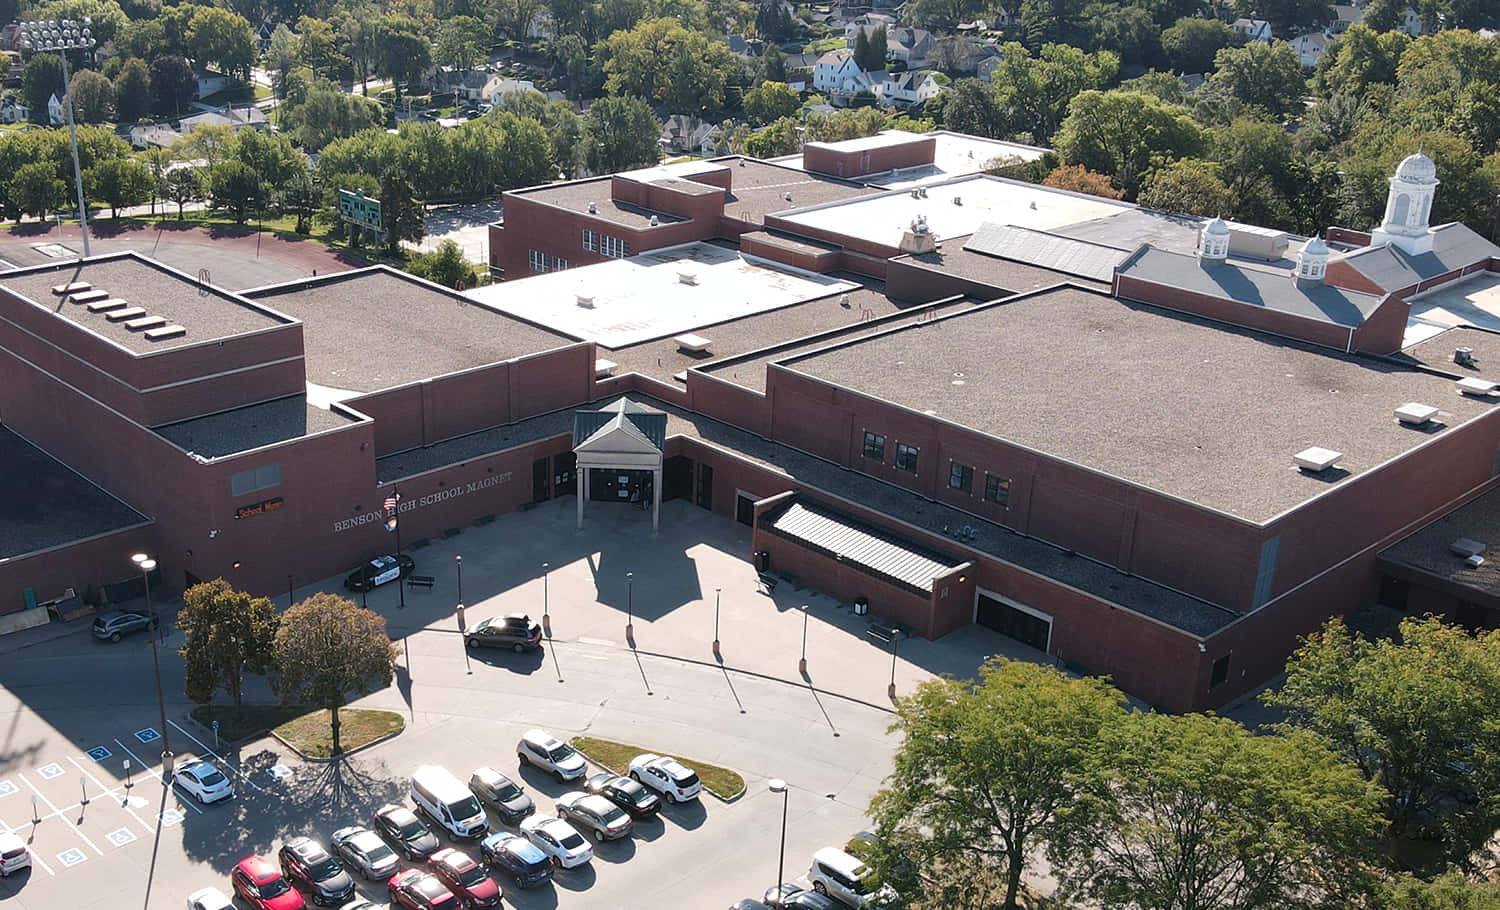 An Aerial View Of A Large Building With Parking Lots